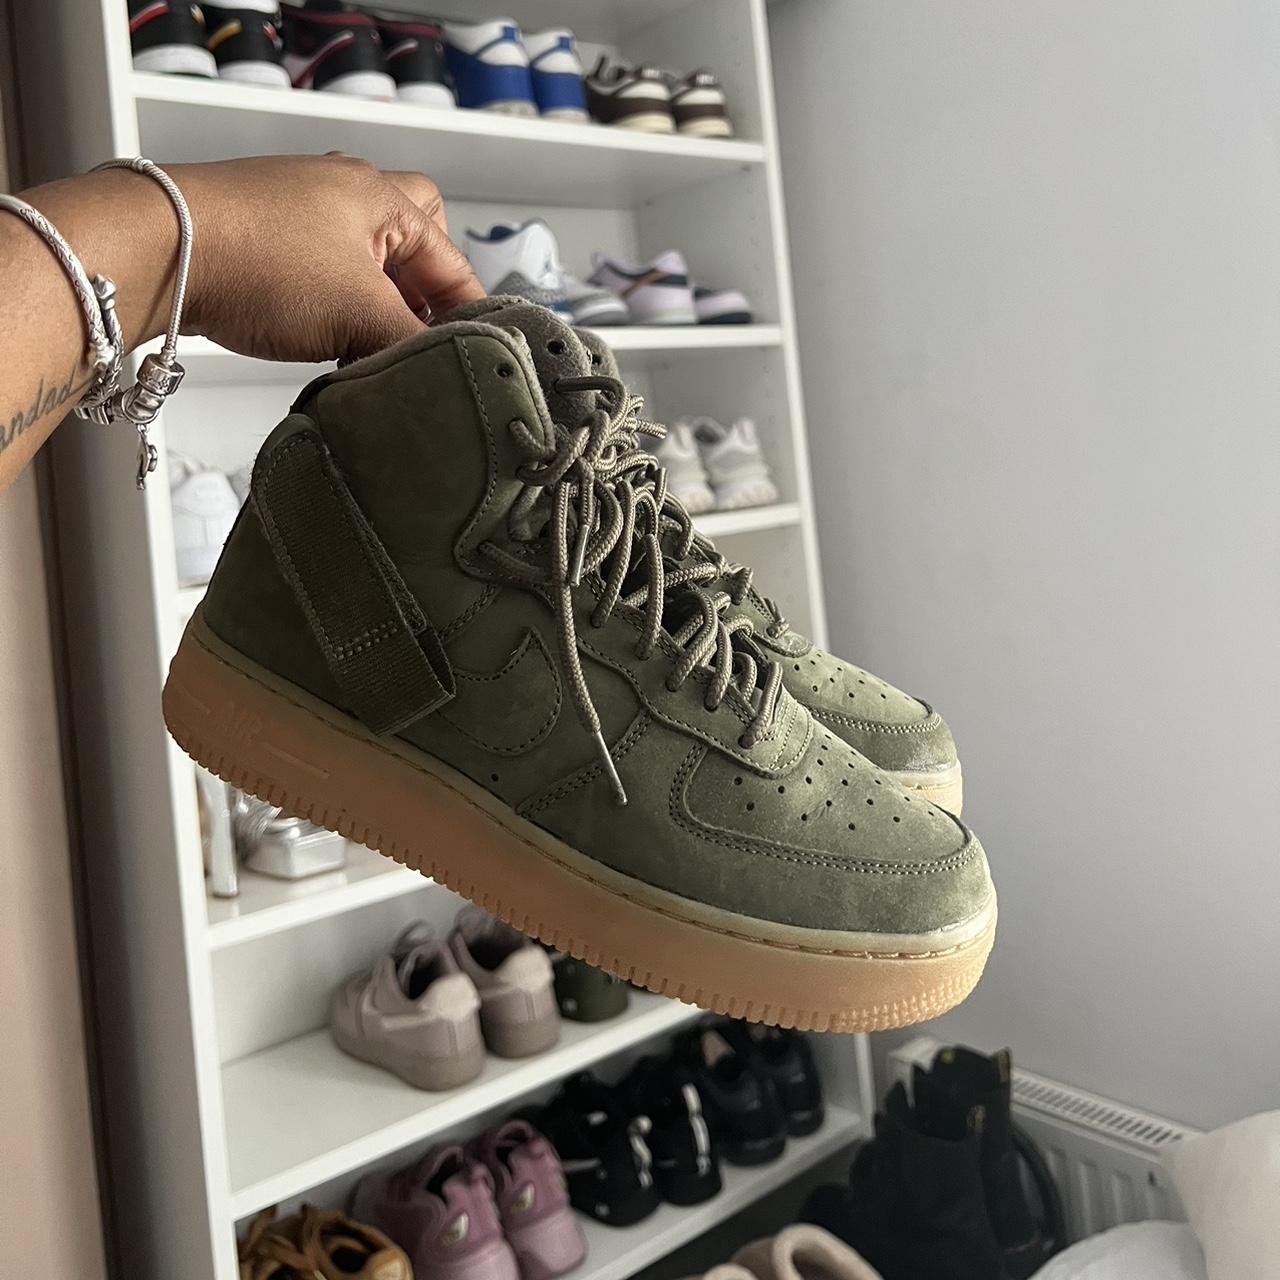 Air Force One 07 LV8 Suede 'Outdoor Green' size 9.5. - Depop